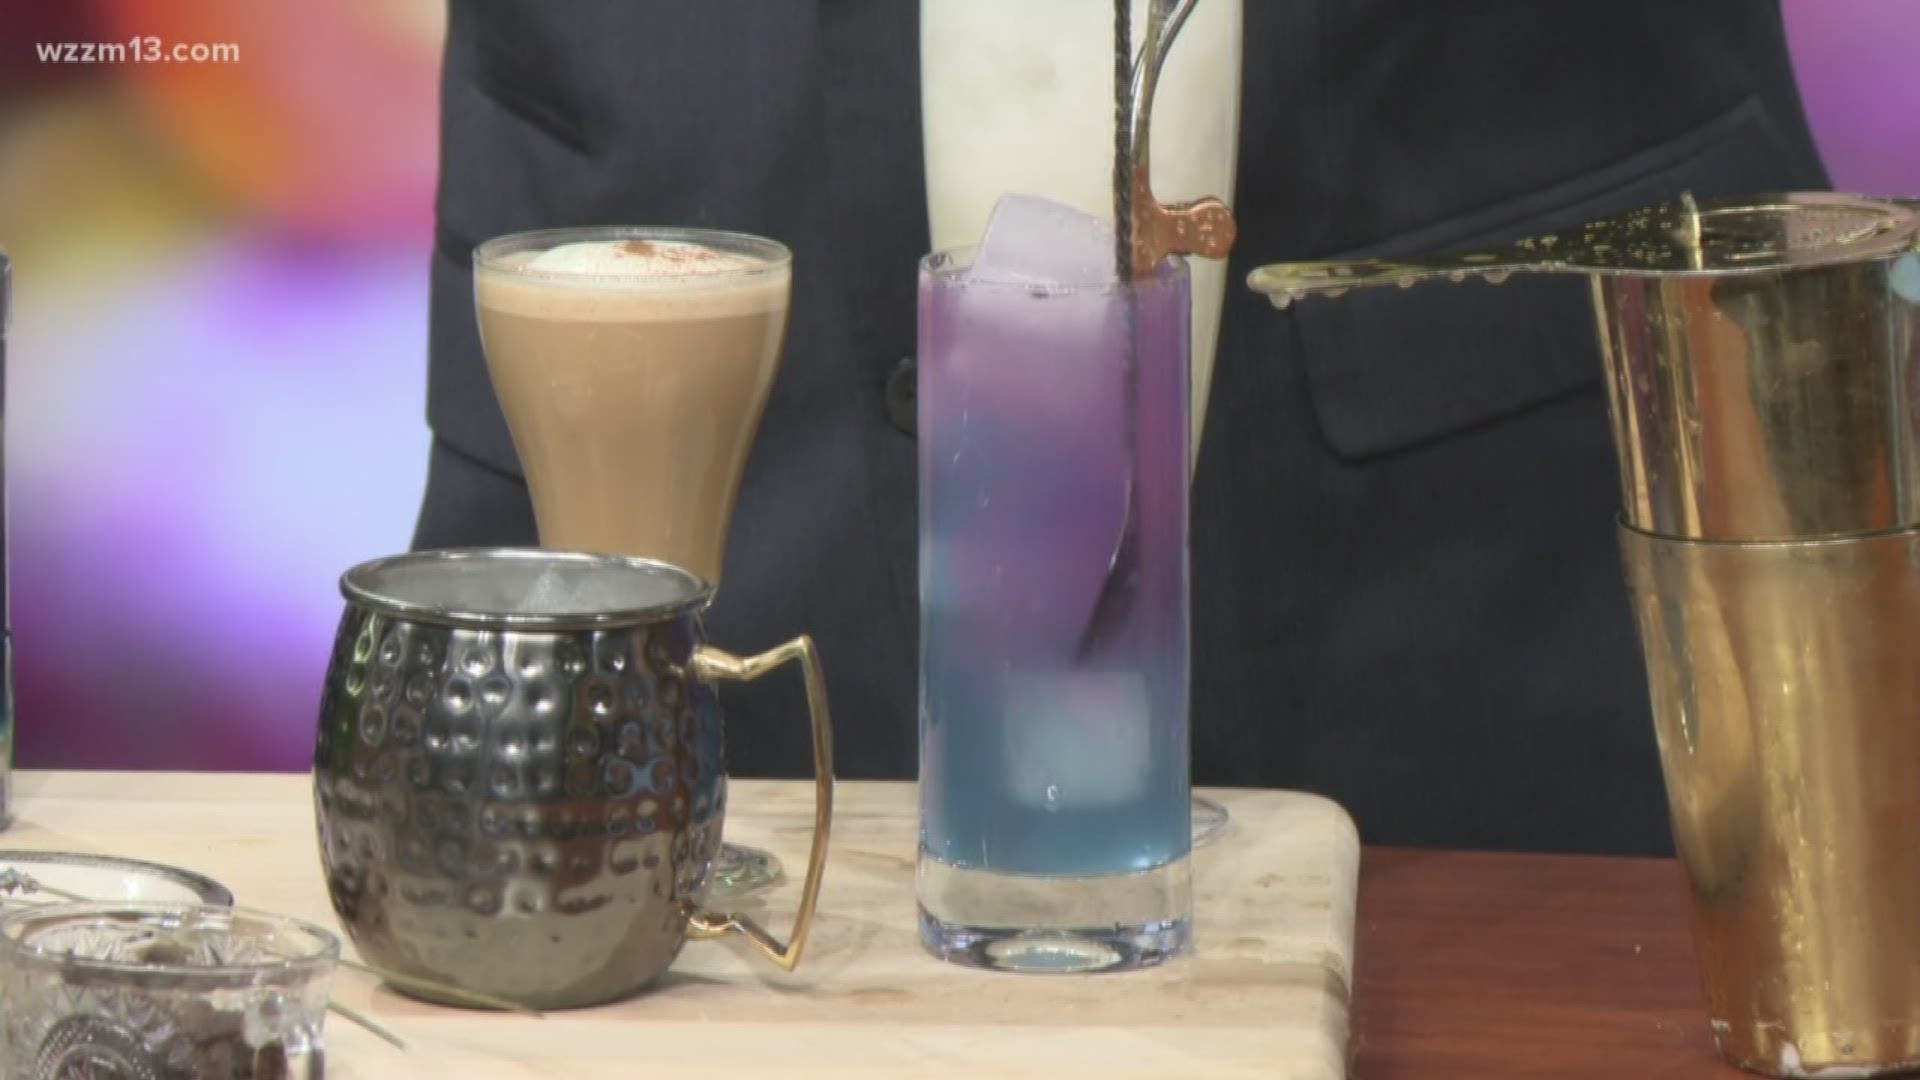 With about a week left of Dry January, the lead mixologist from Lumber Baron Bar came to show us some "Mocktails"